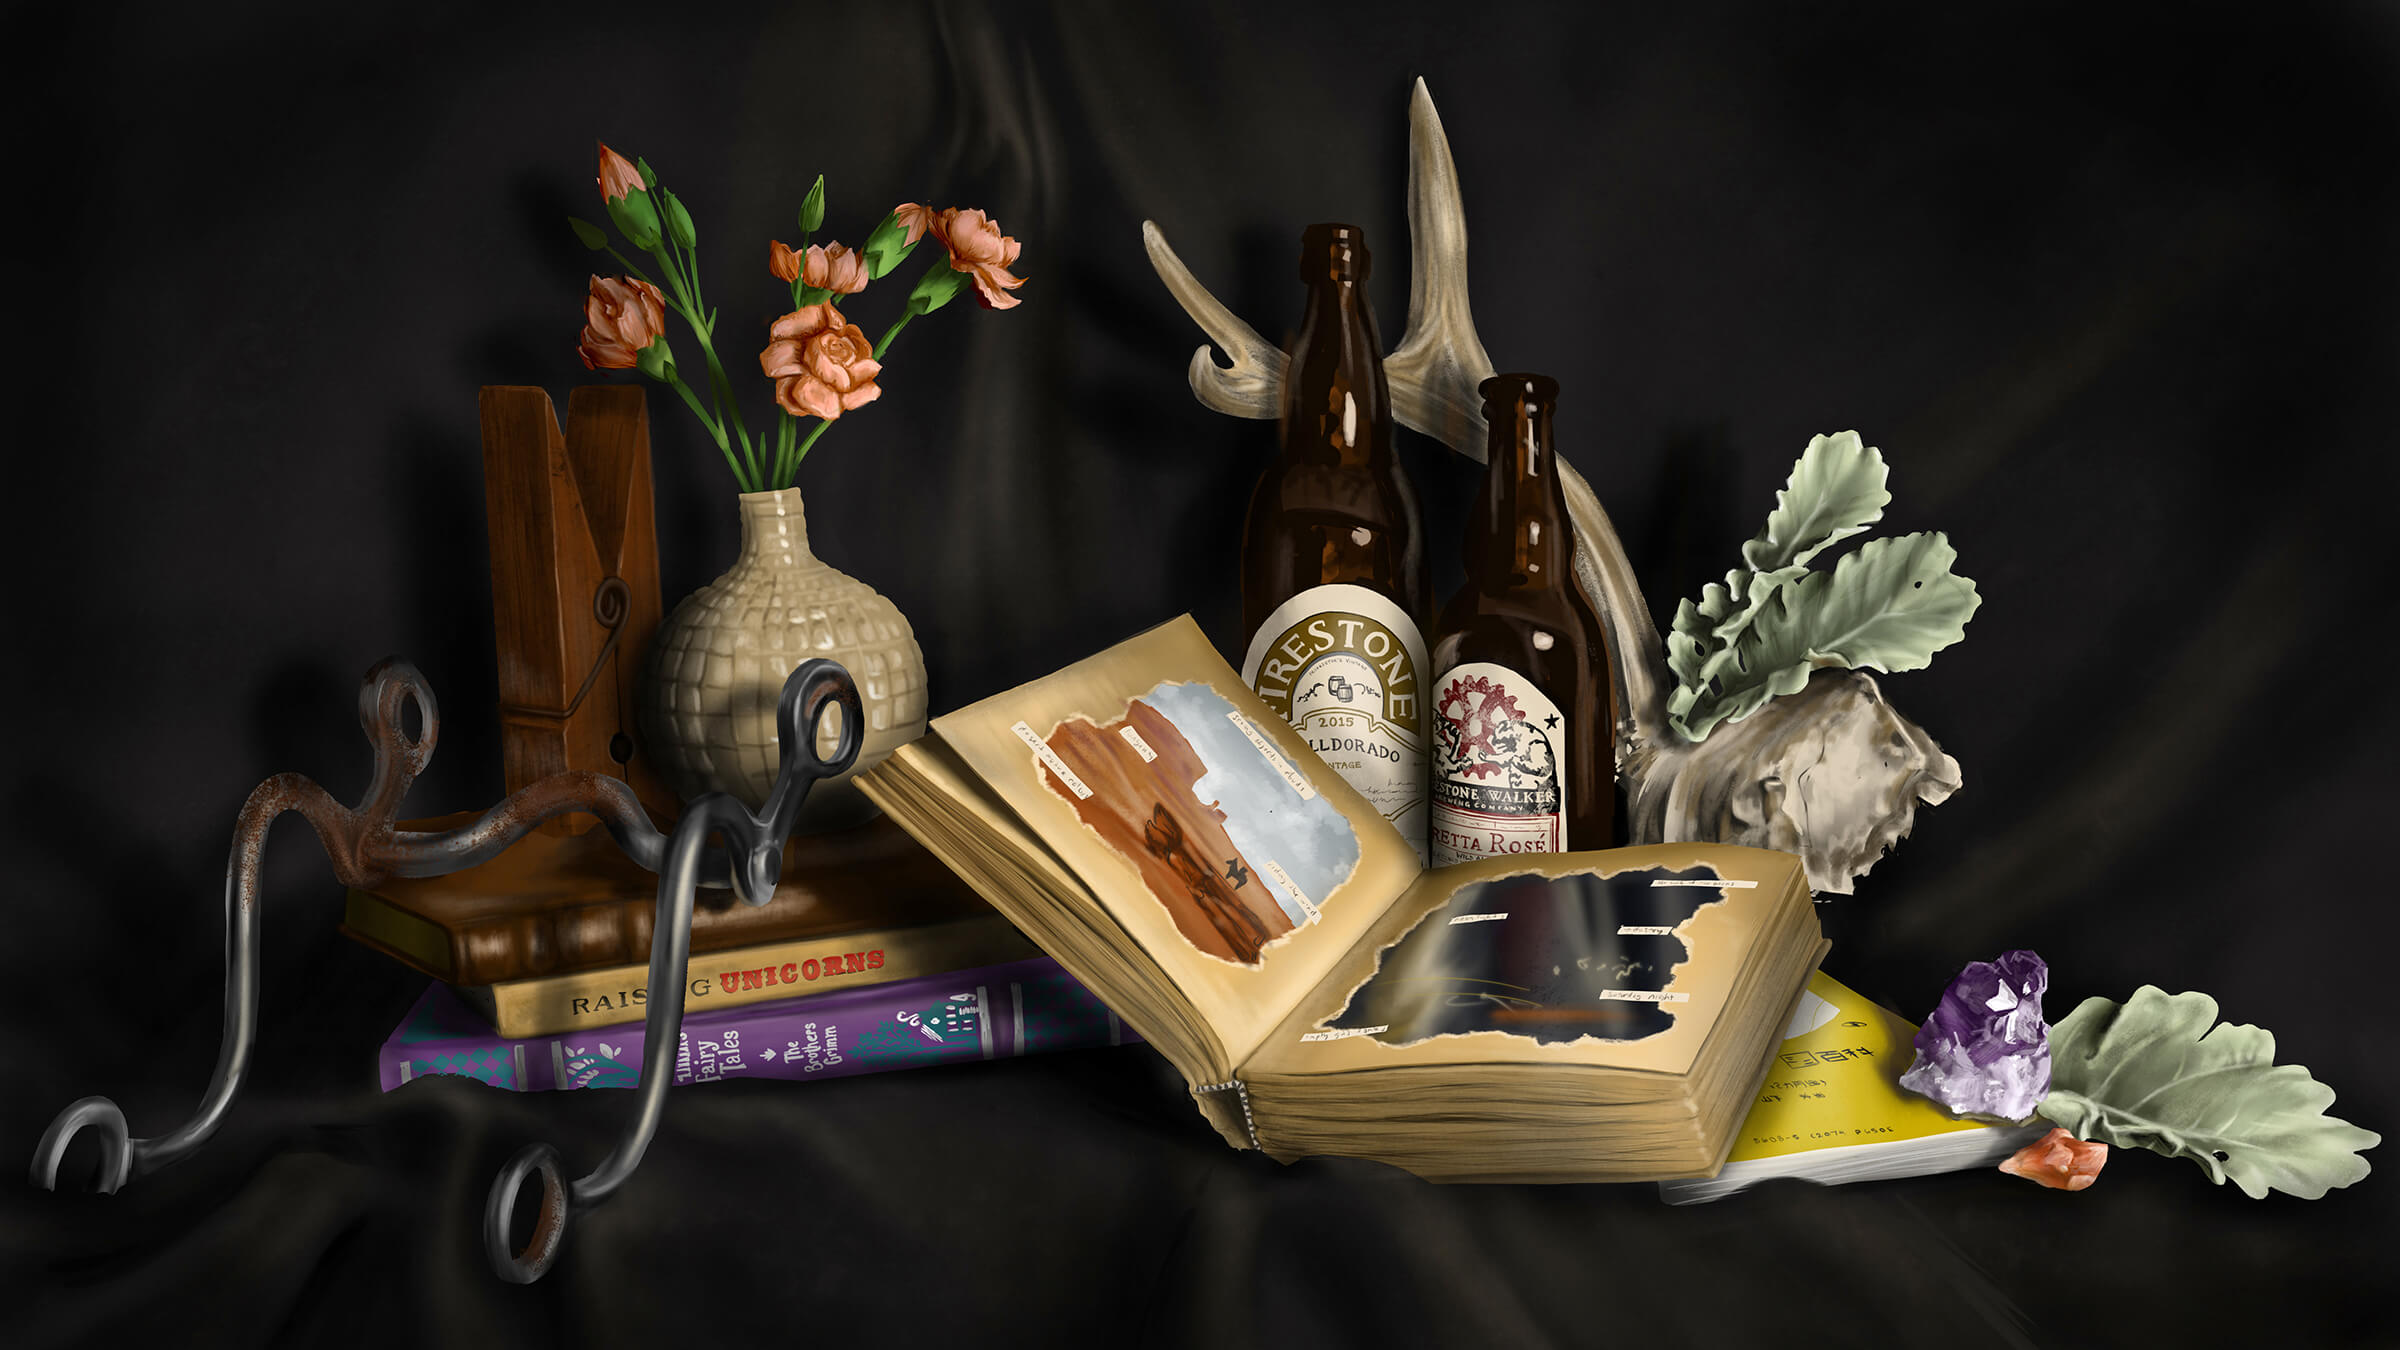 still-life traditional painting of objects including books, bottles, a vase with flowers, an antler, and a large clothespin